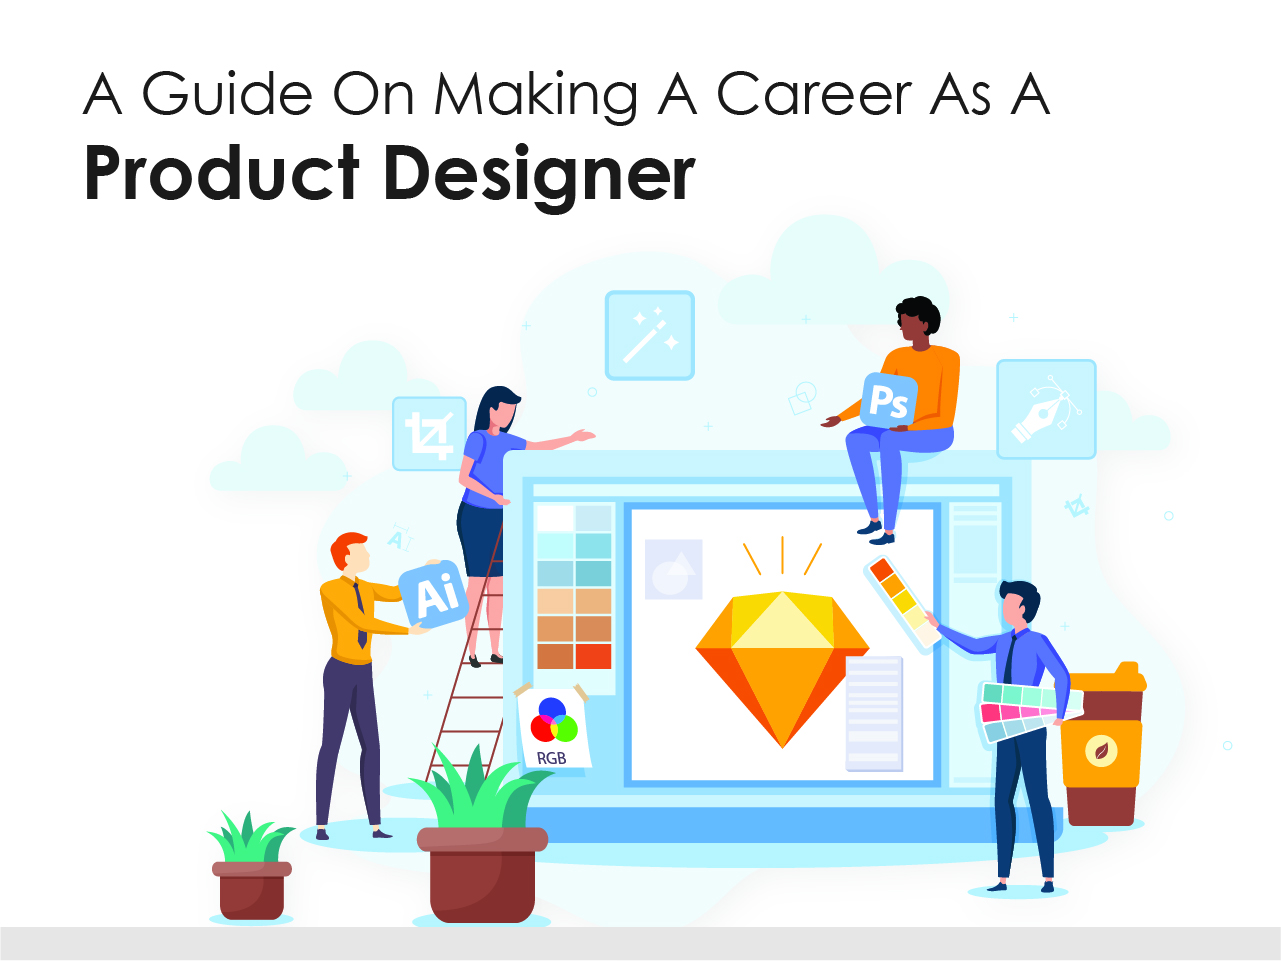 Career in product design